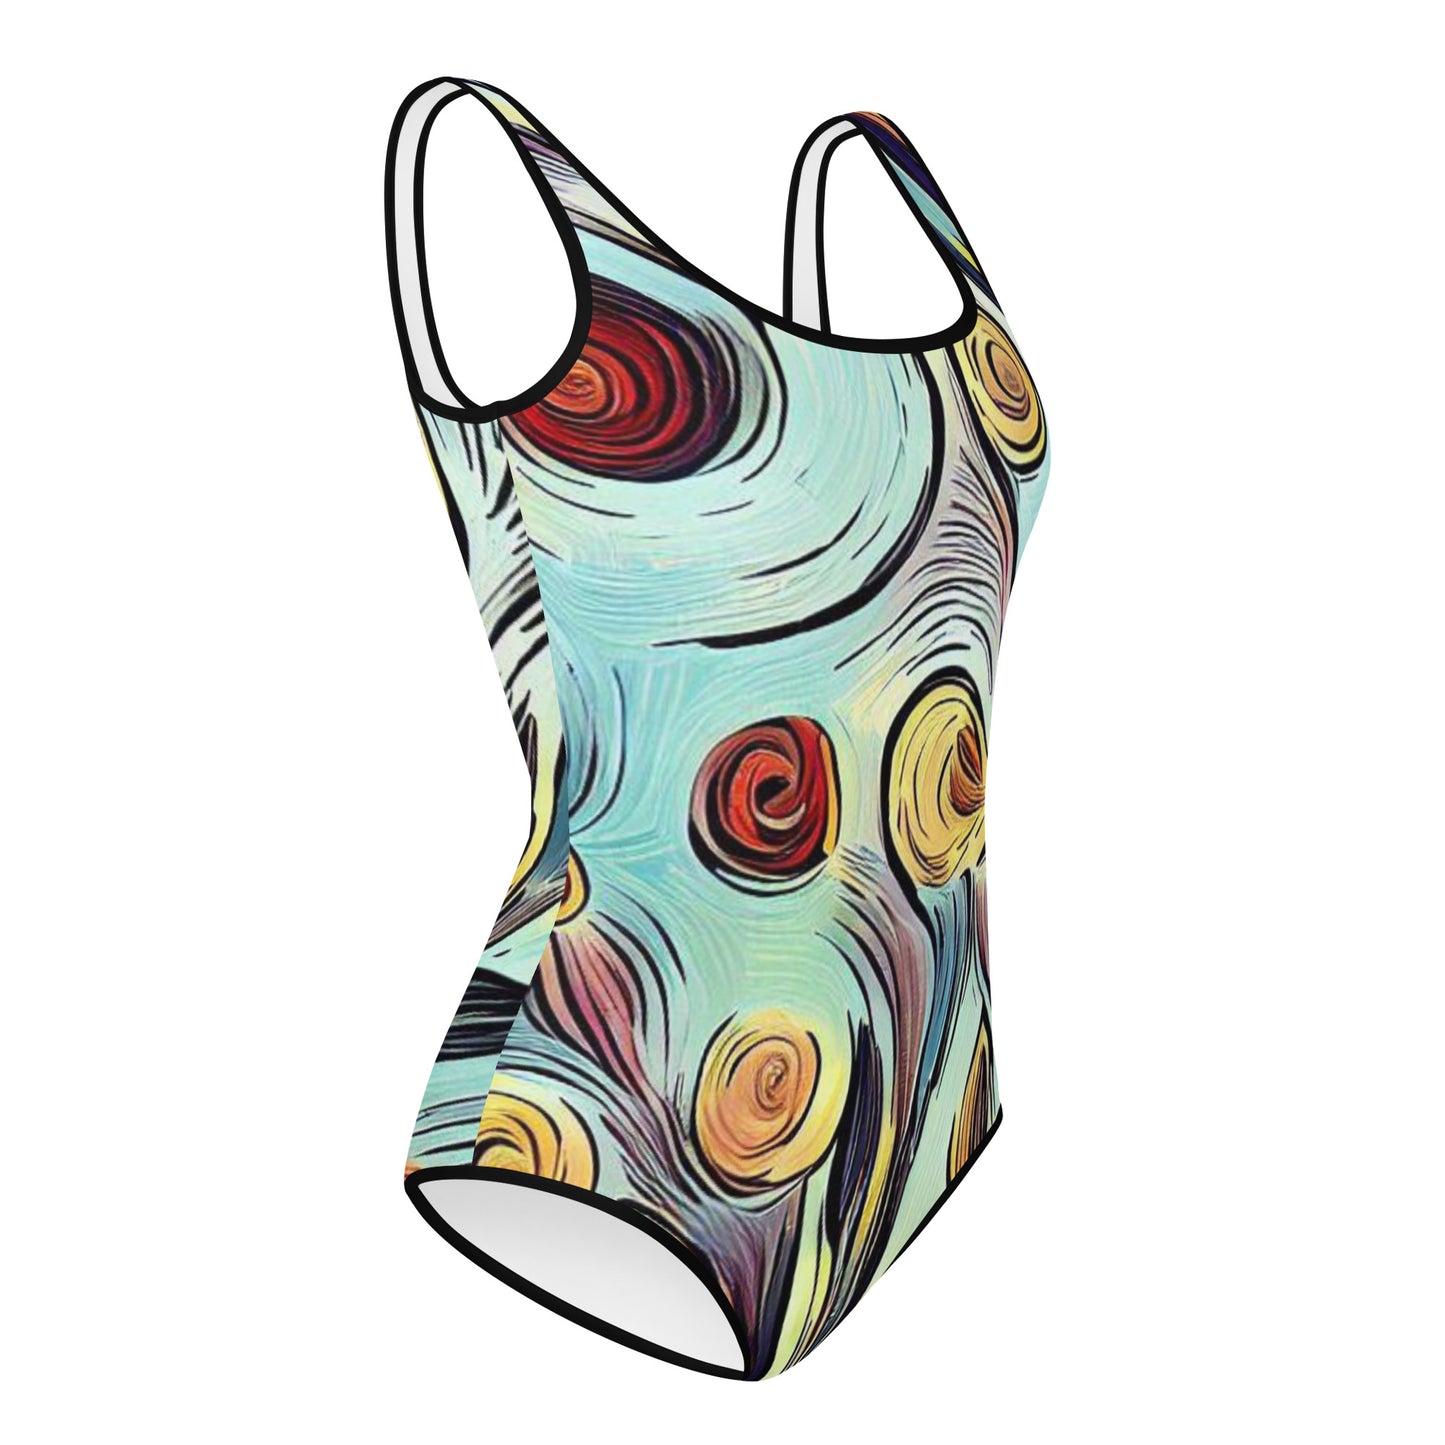 Maillot de bain impressionniste Bloom Youth